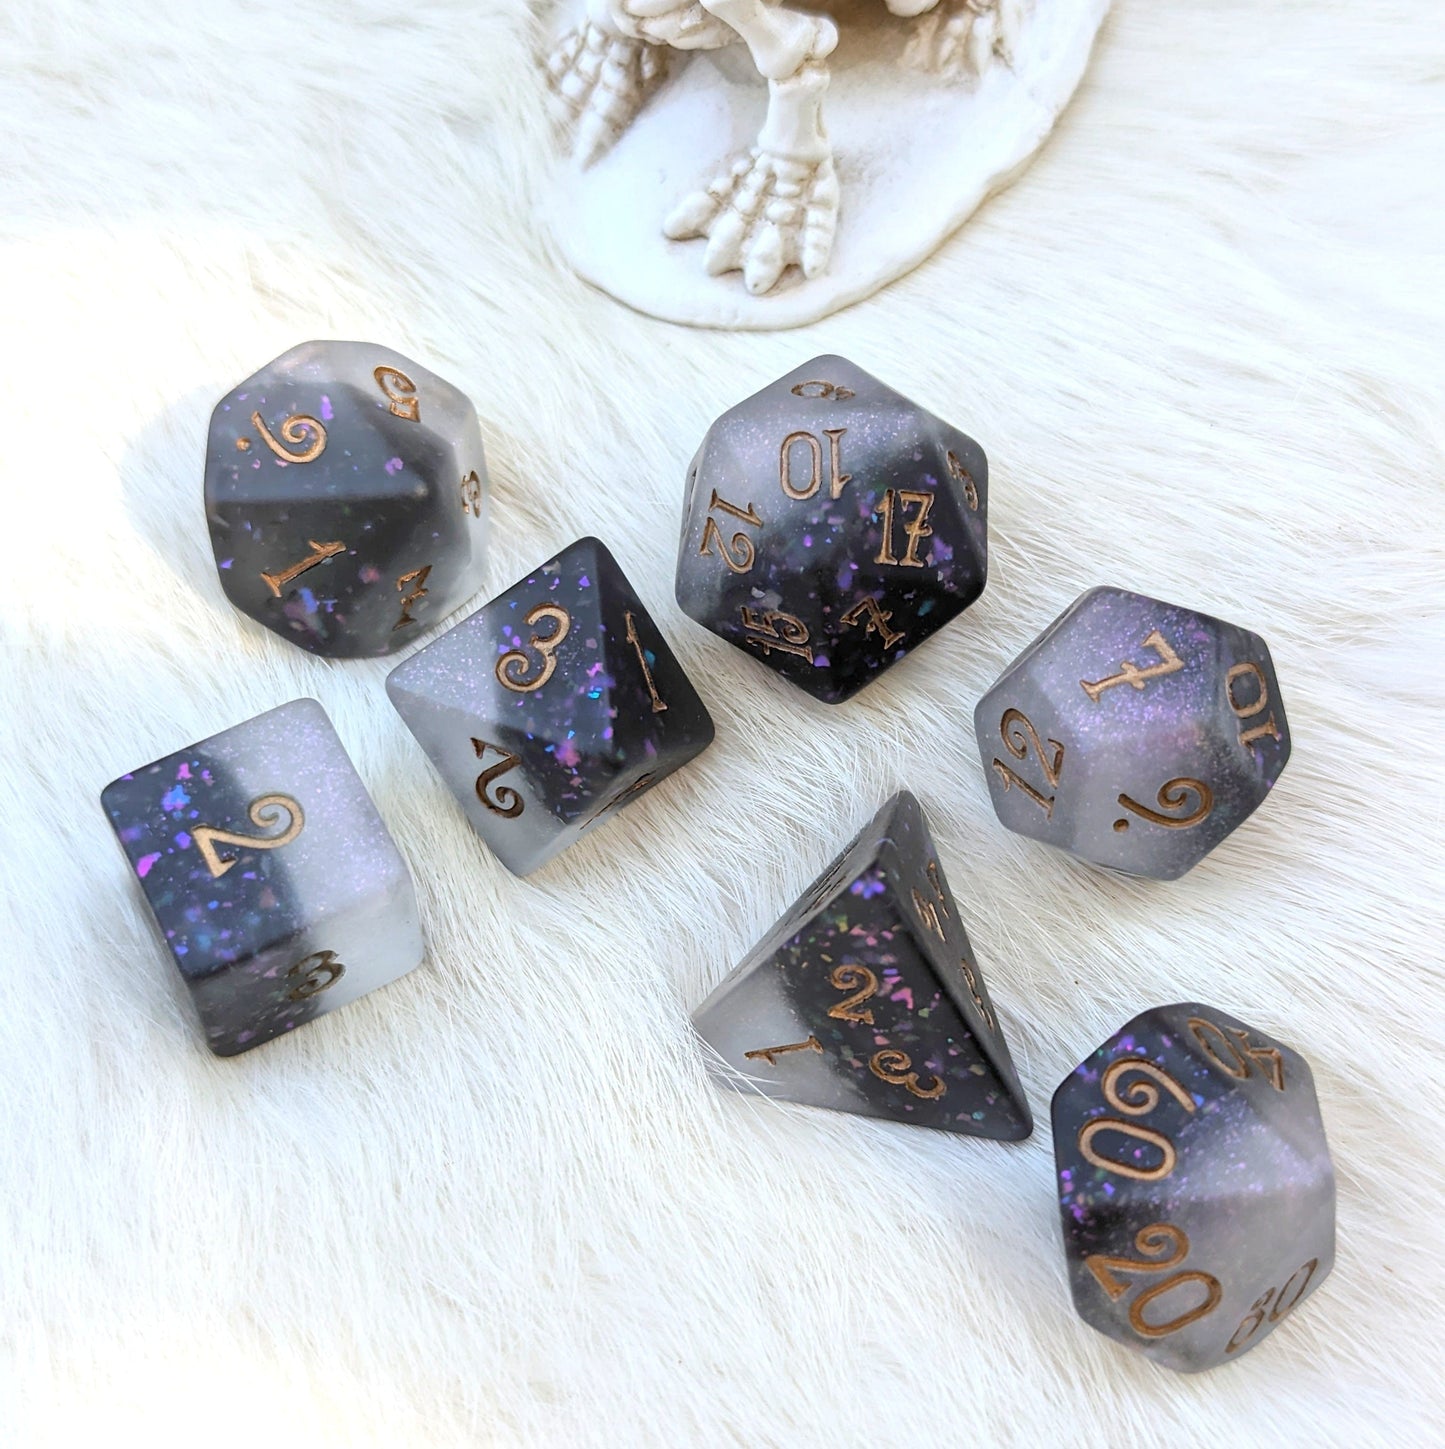 Light and Dark 7 Piece Dice Set. Black and White Frosted Dice.